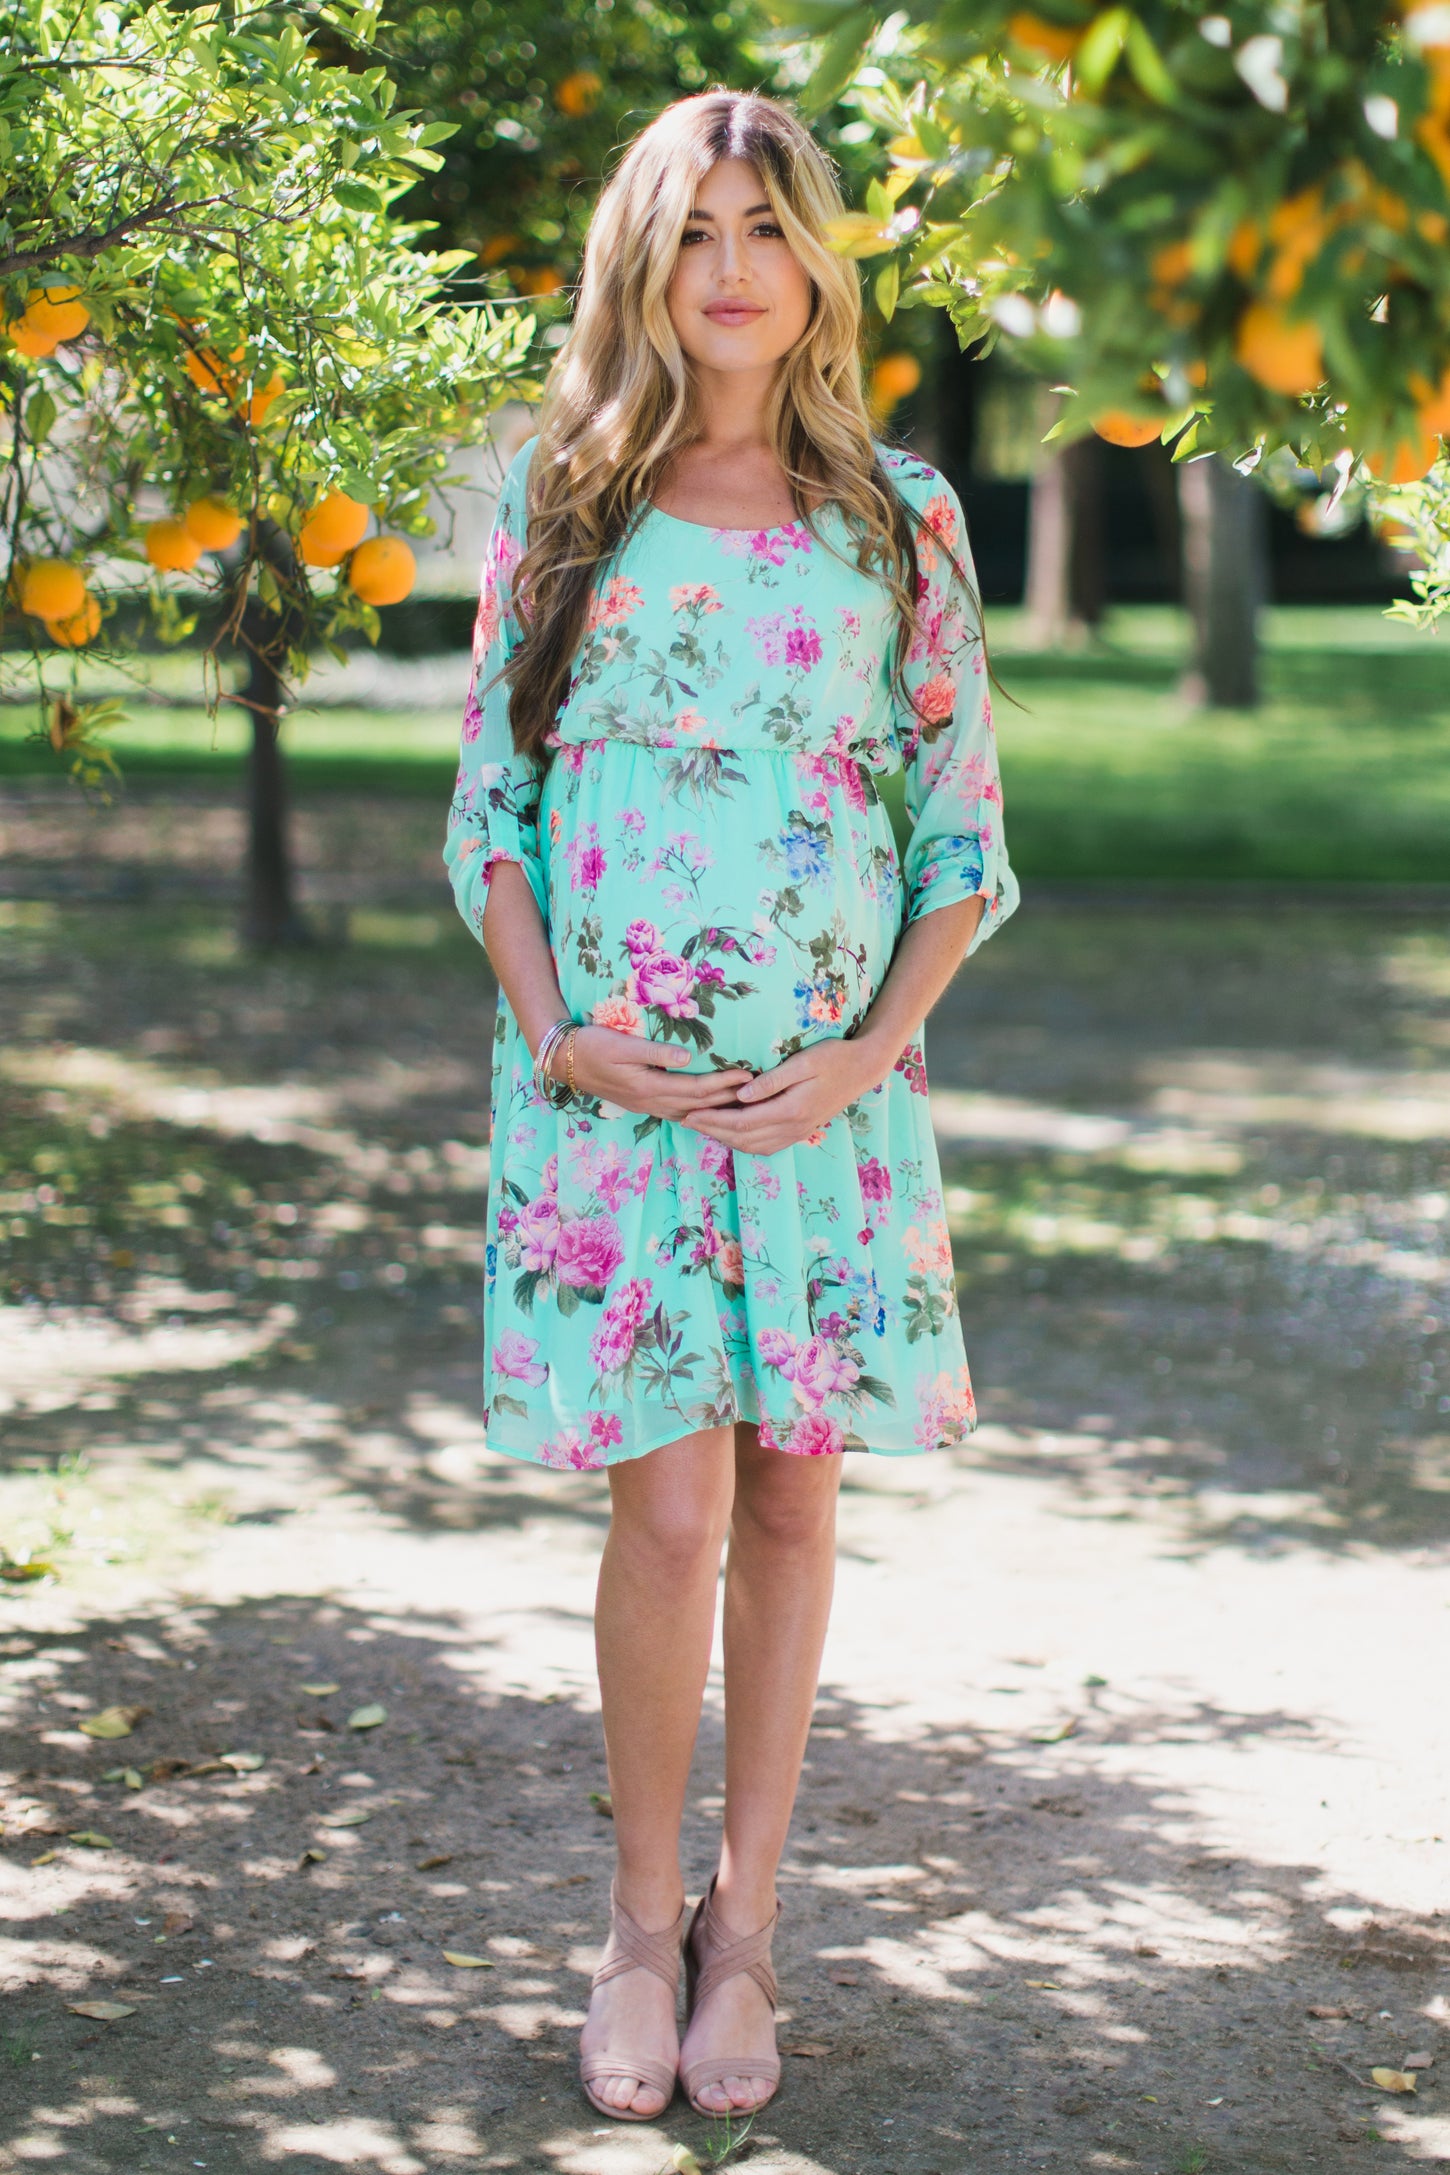 Nursing-Friendly Tops And Dresses + Outfit Ideas - My Kind of Sweet